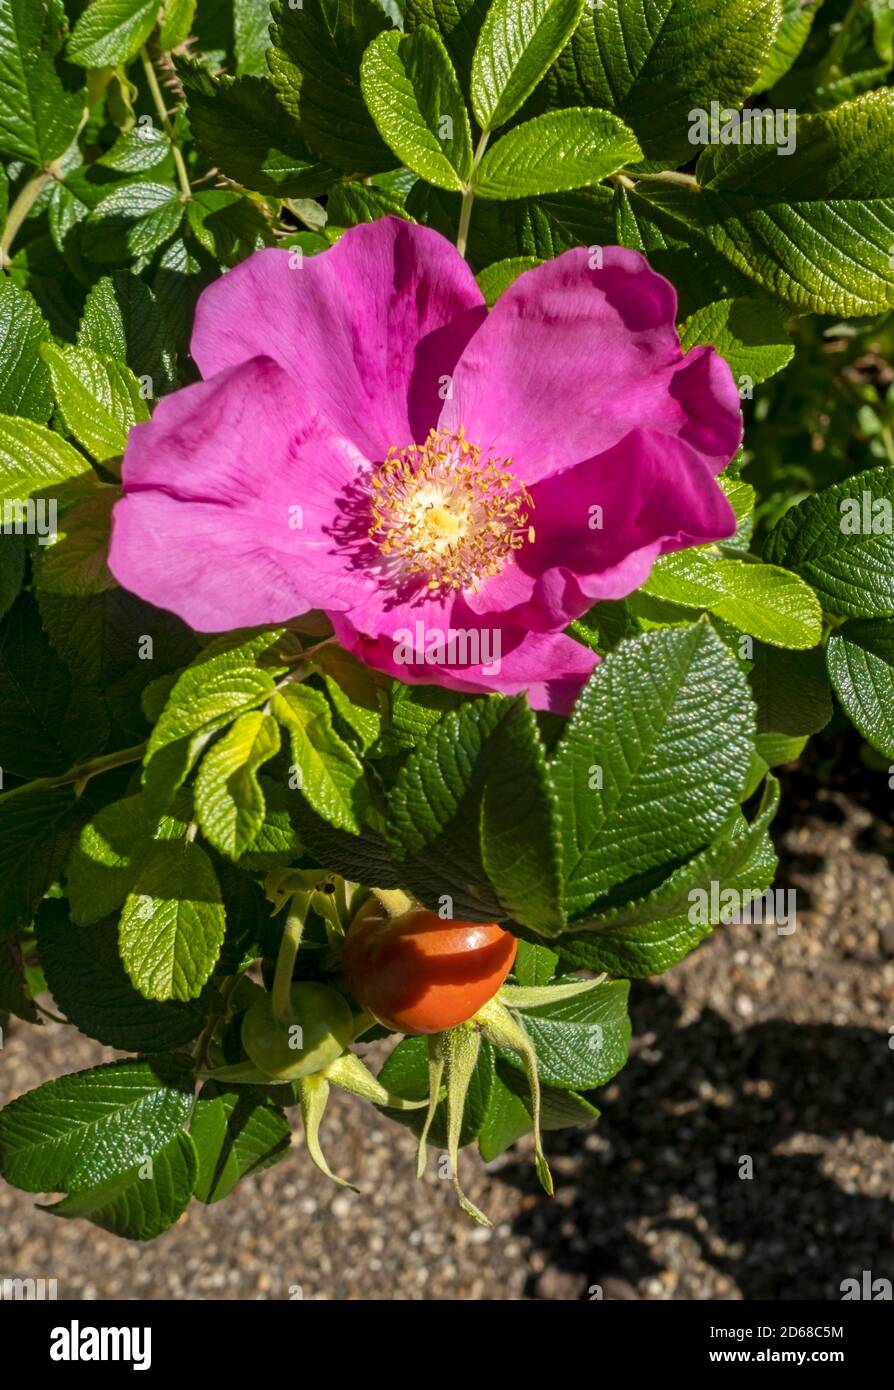 Close up of pink rose and hips rosaceae rosa rugosa shrub in summer England UK United Kingdom GB Great Britain Stock Photo